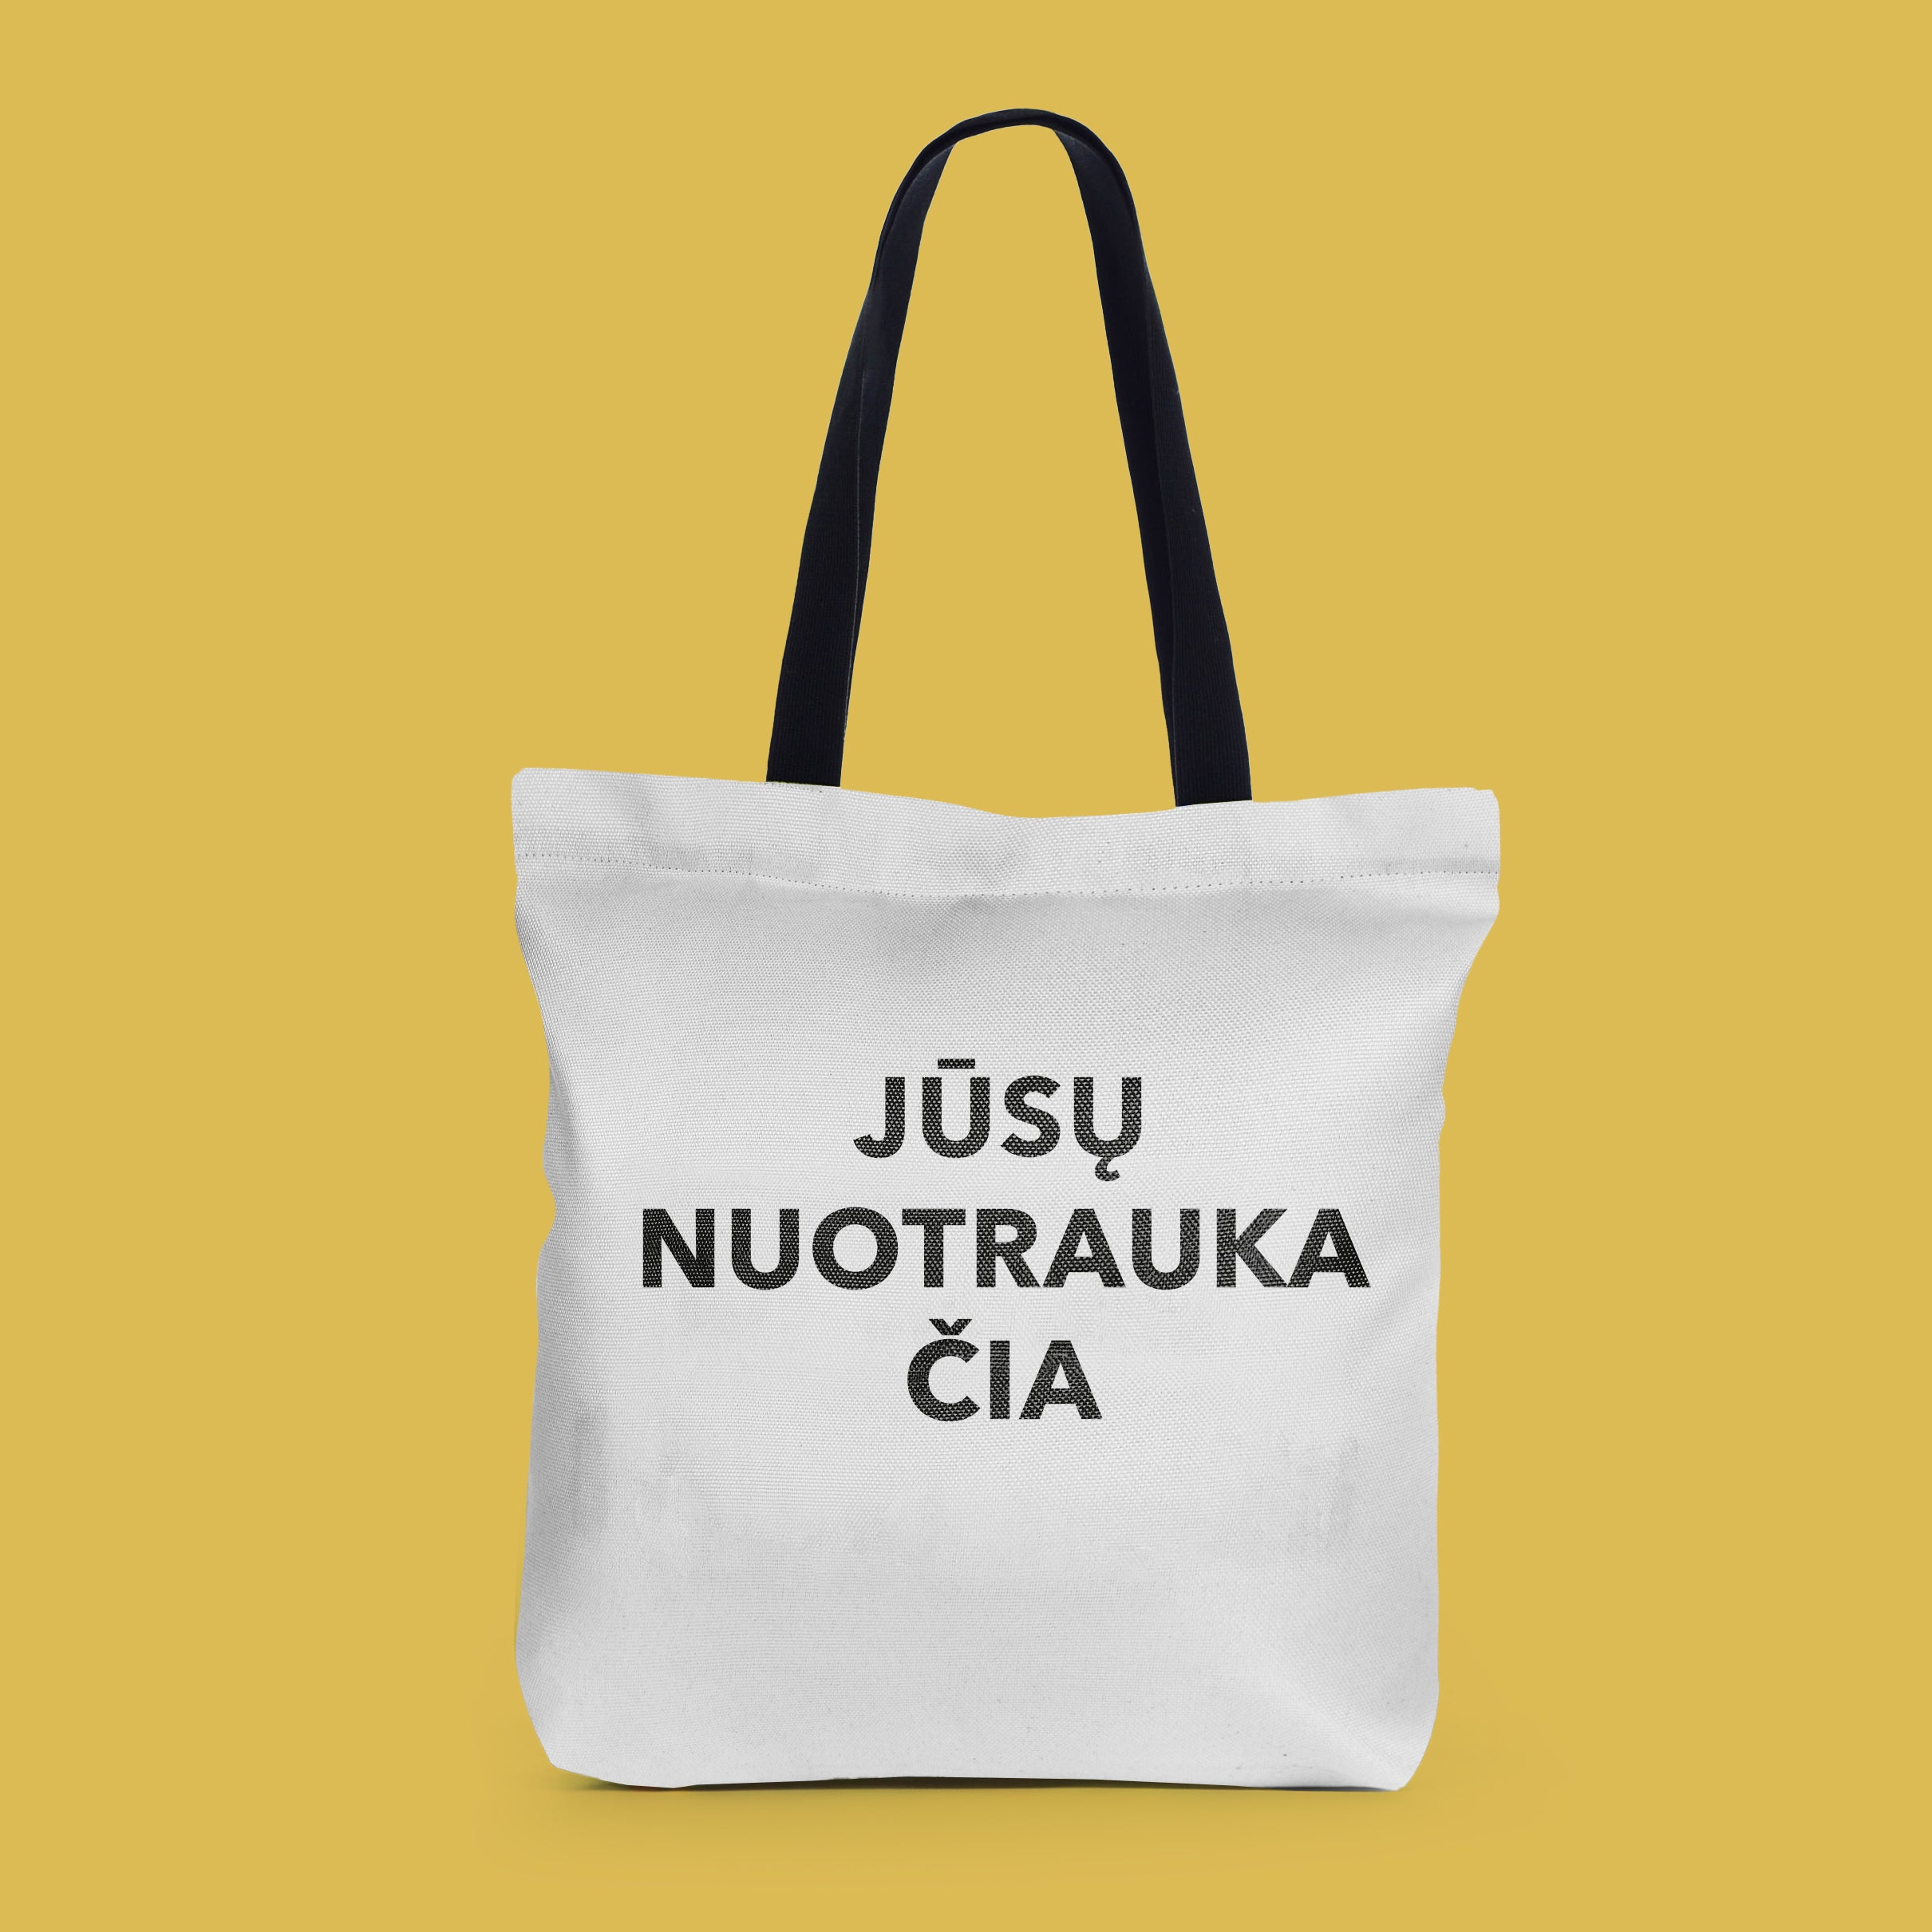 Shopping bag with your photo